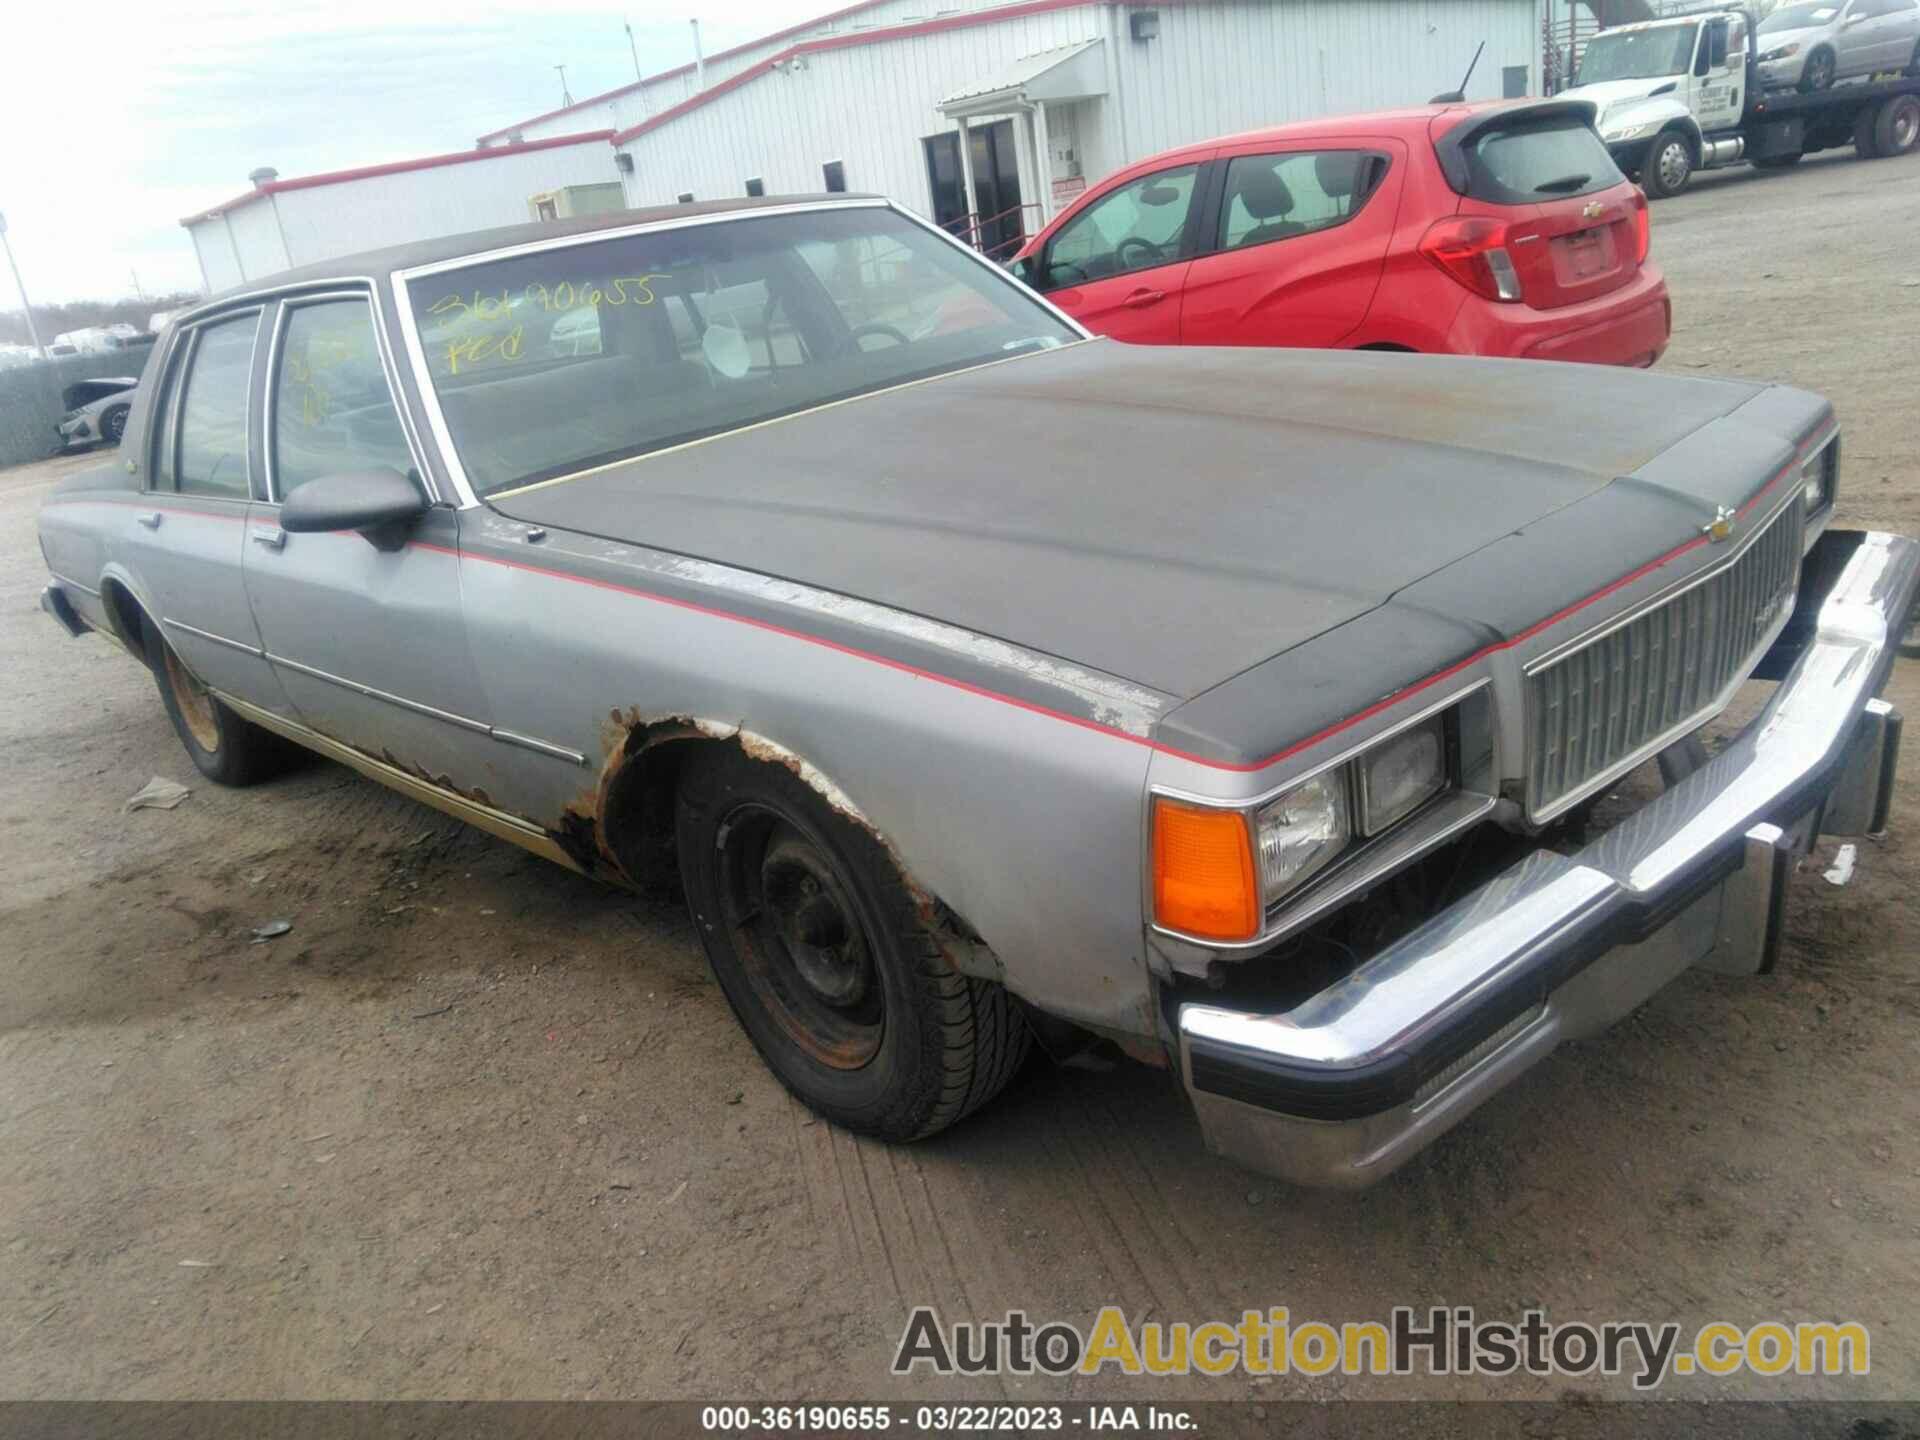 CHEVROLET CAPRICE CLASSIC, 1G1BN69H7GY154327